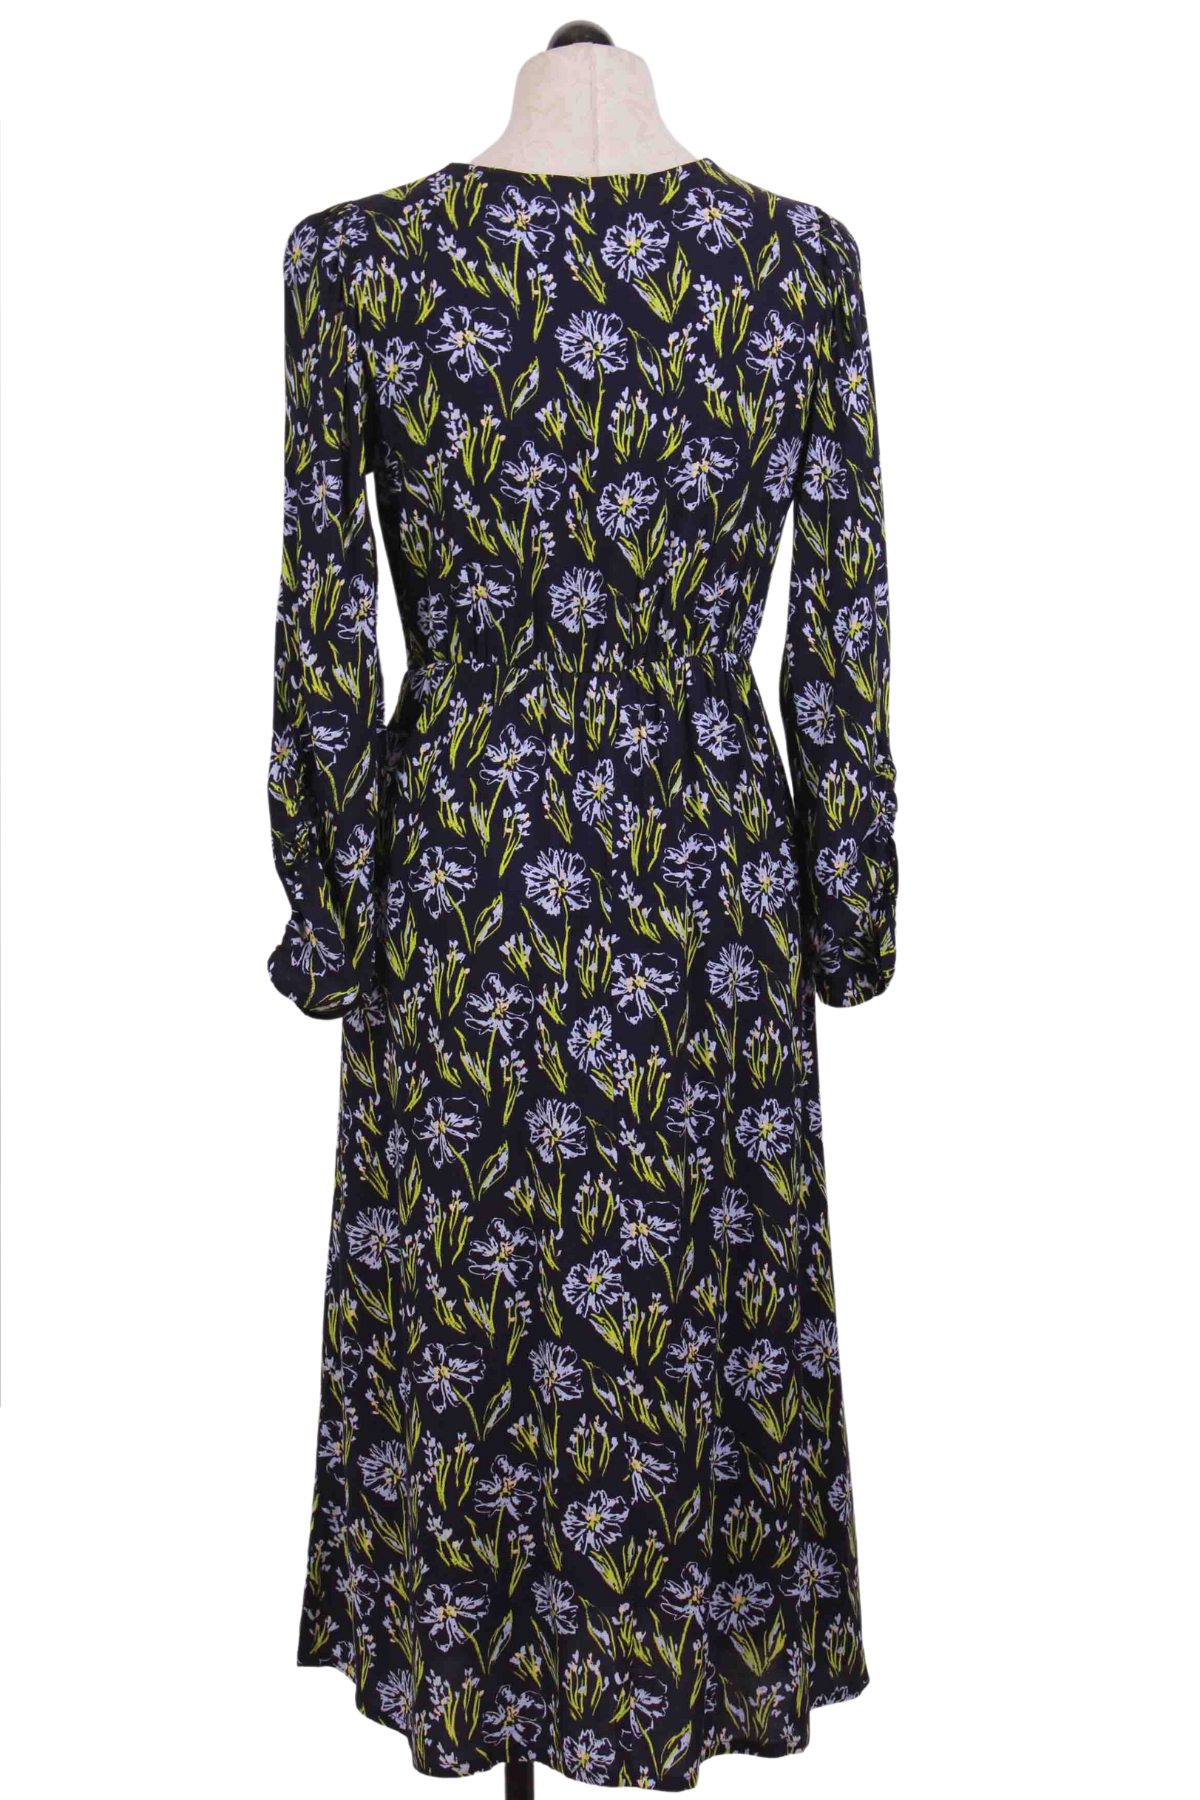 back view of Long Sleeve Floral Ruched Sleeve V Neck Dress by Compania Fantastica